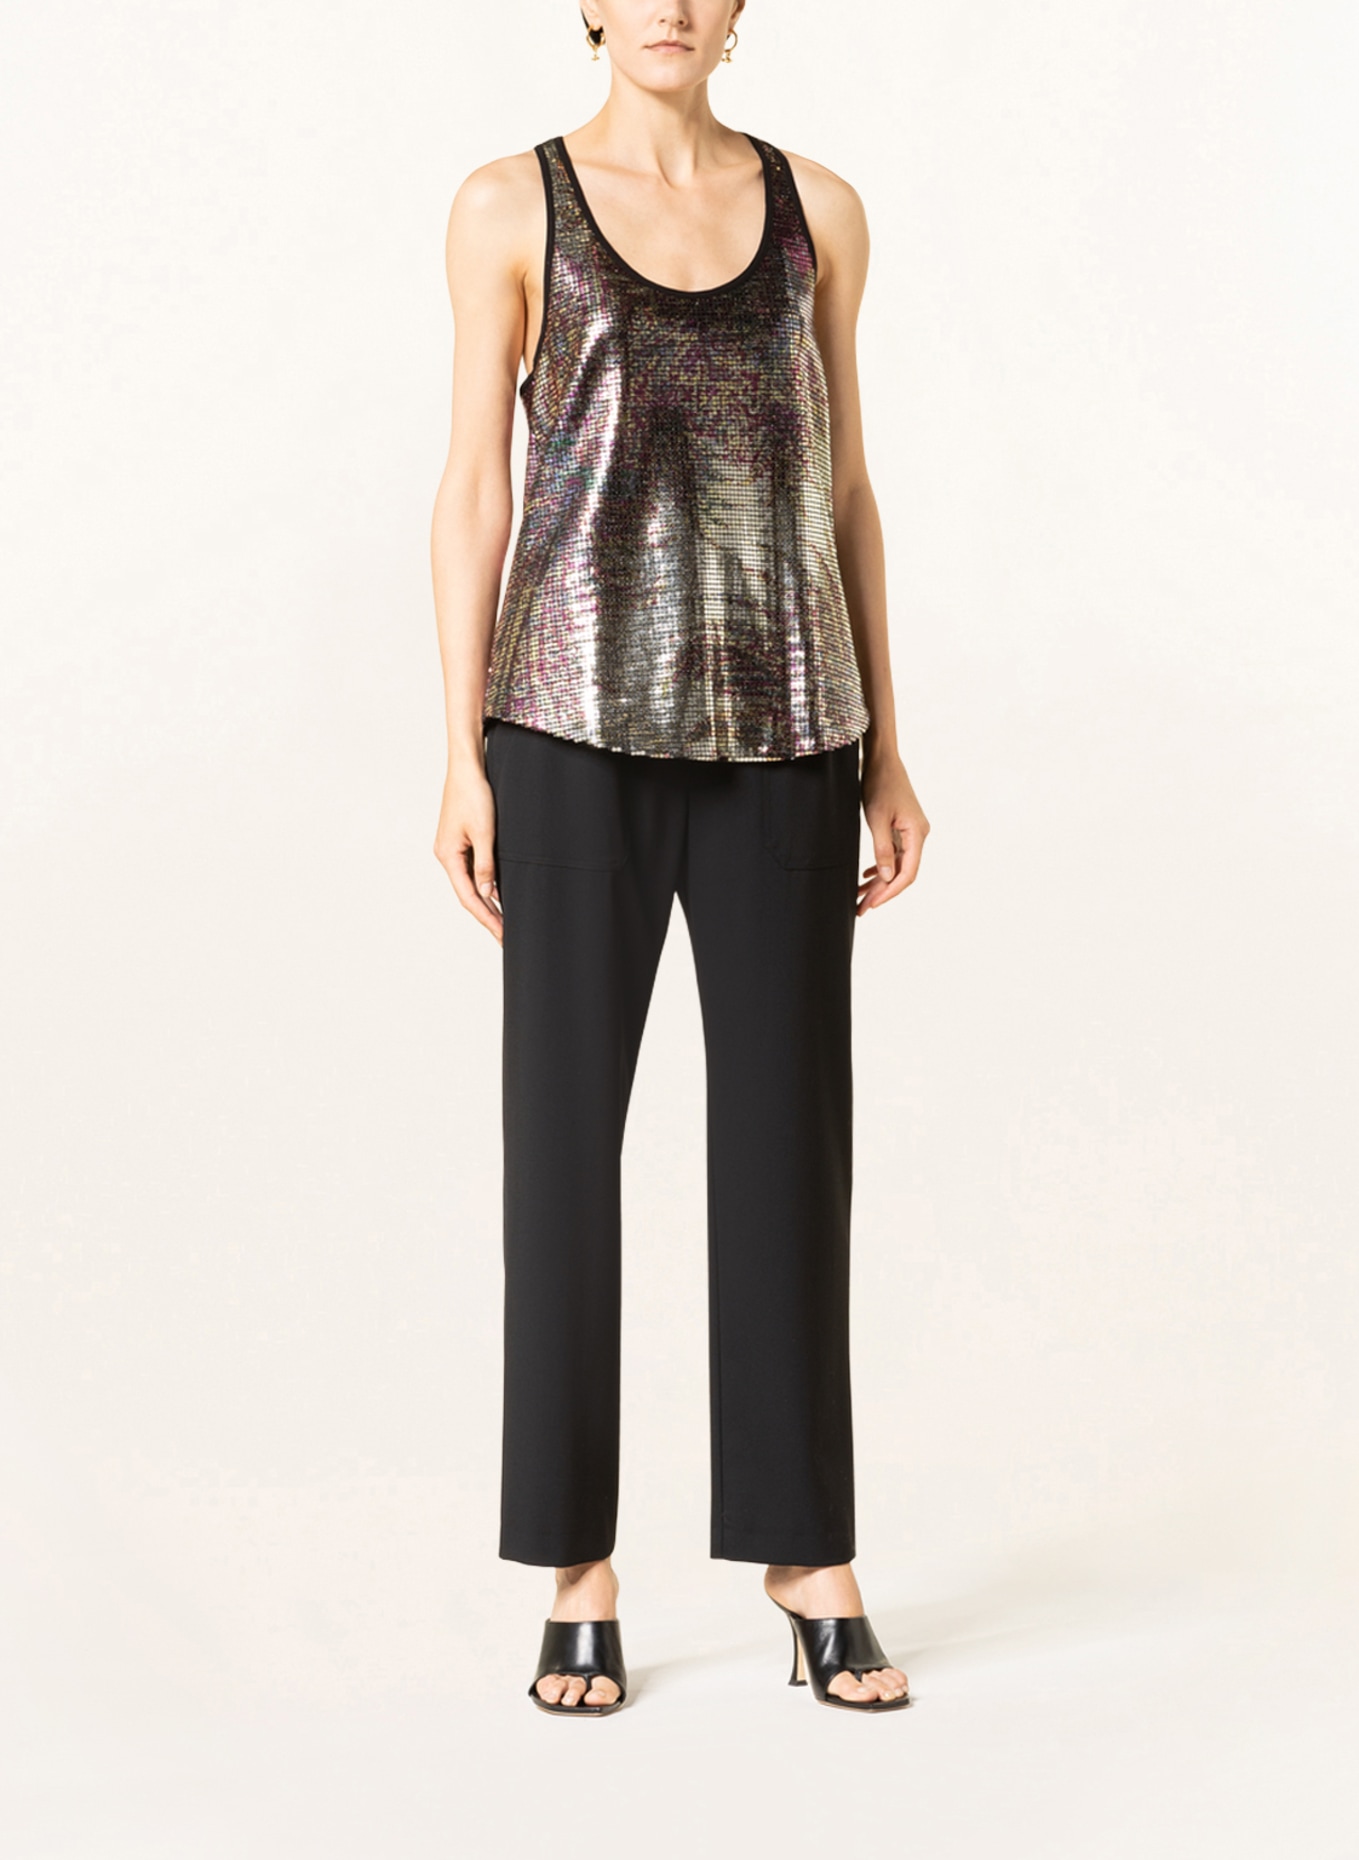 ETRO Top ANICKA with sequins, Color: DARK RED/ BLACK (Image 2)